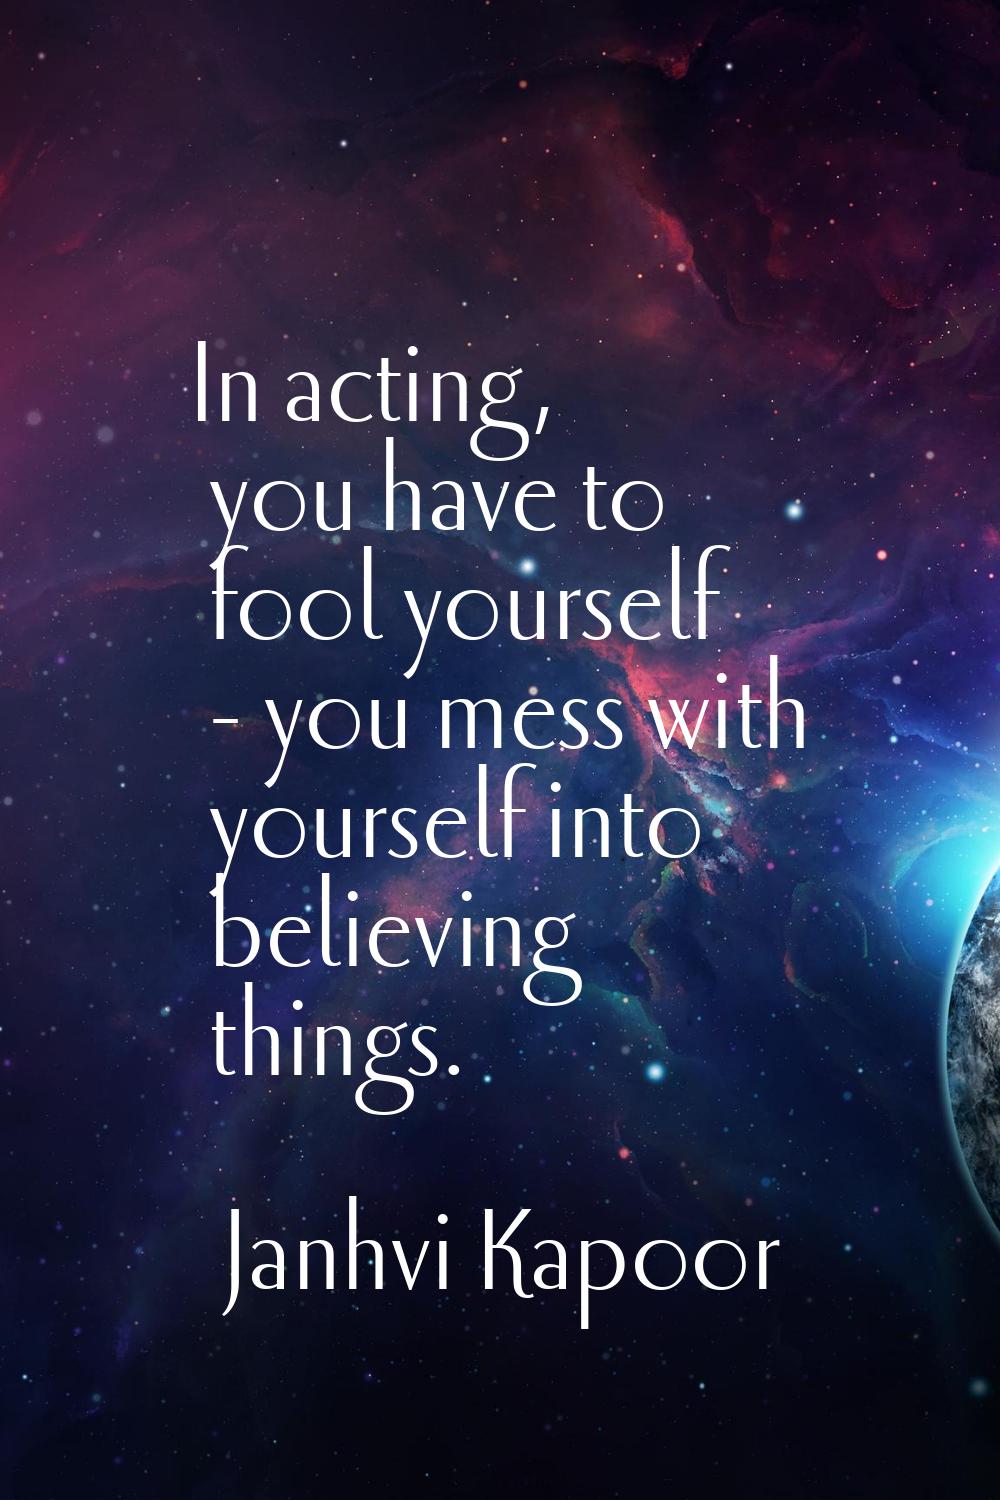 In acting, you have to fool yourself - you mess with yourself into believing things.